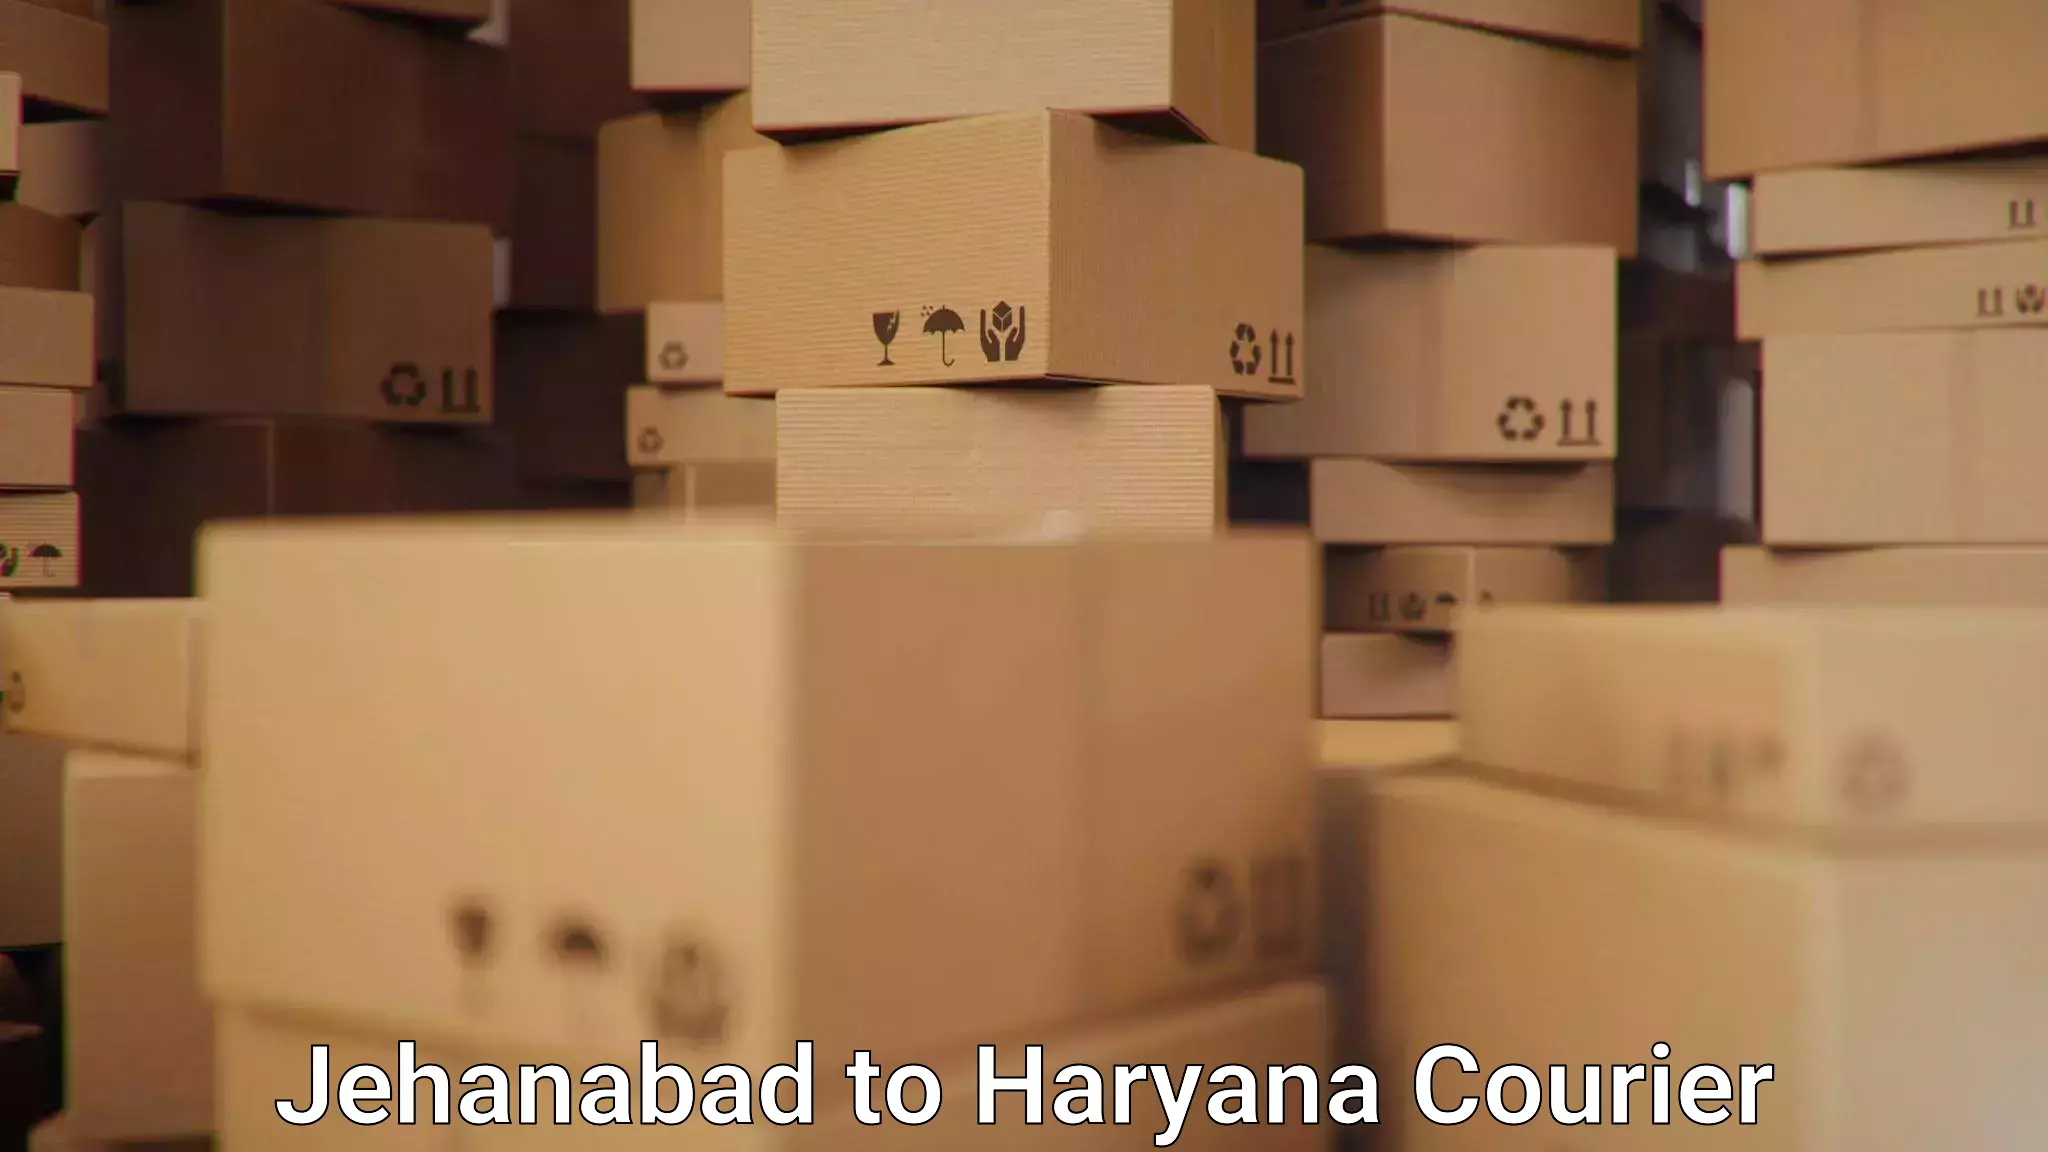 High-priority parcel service Jehanabad to NCR Haryana